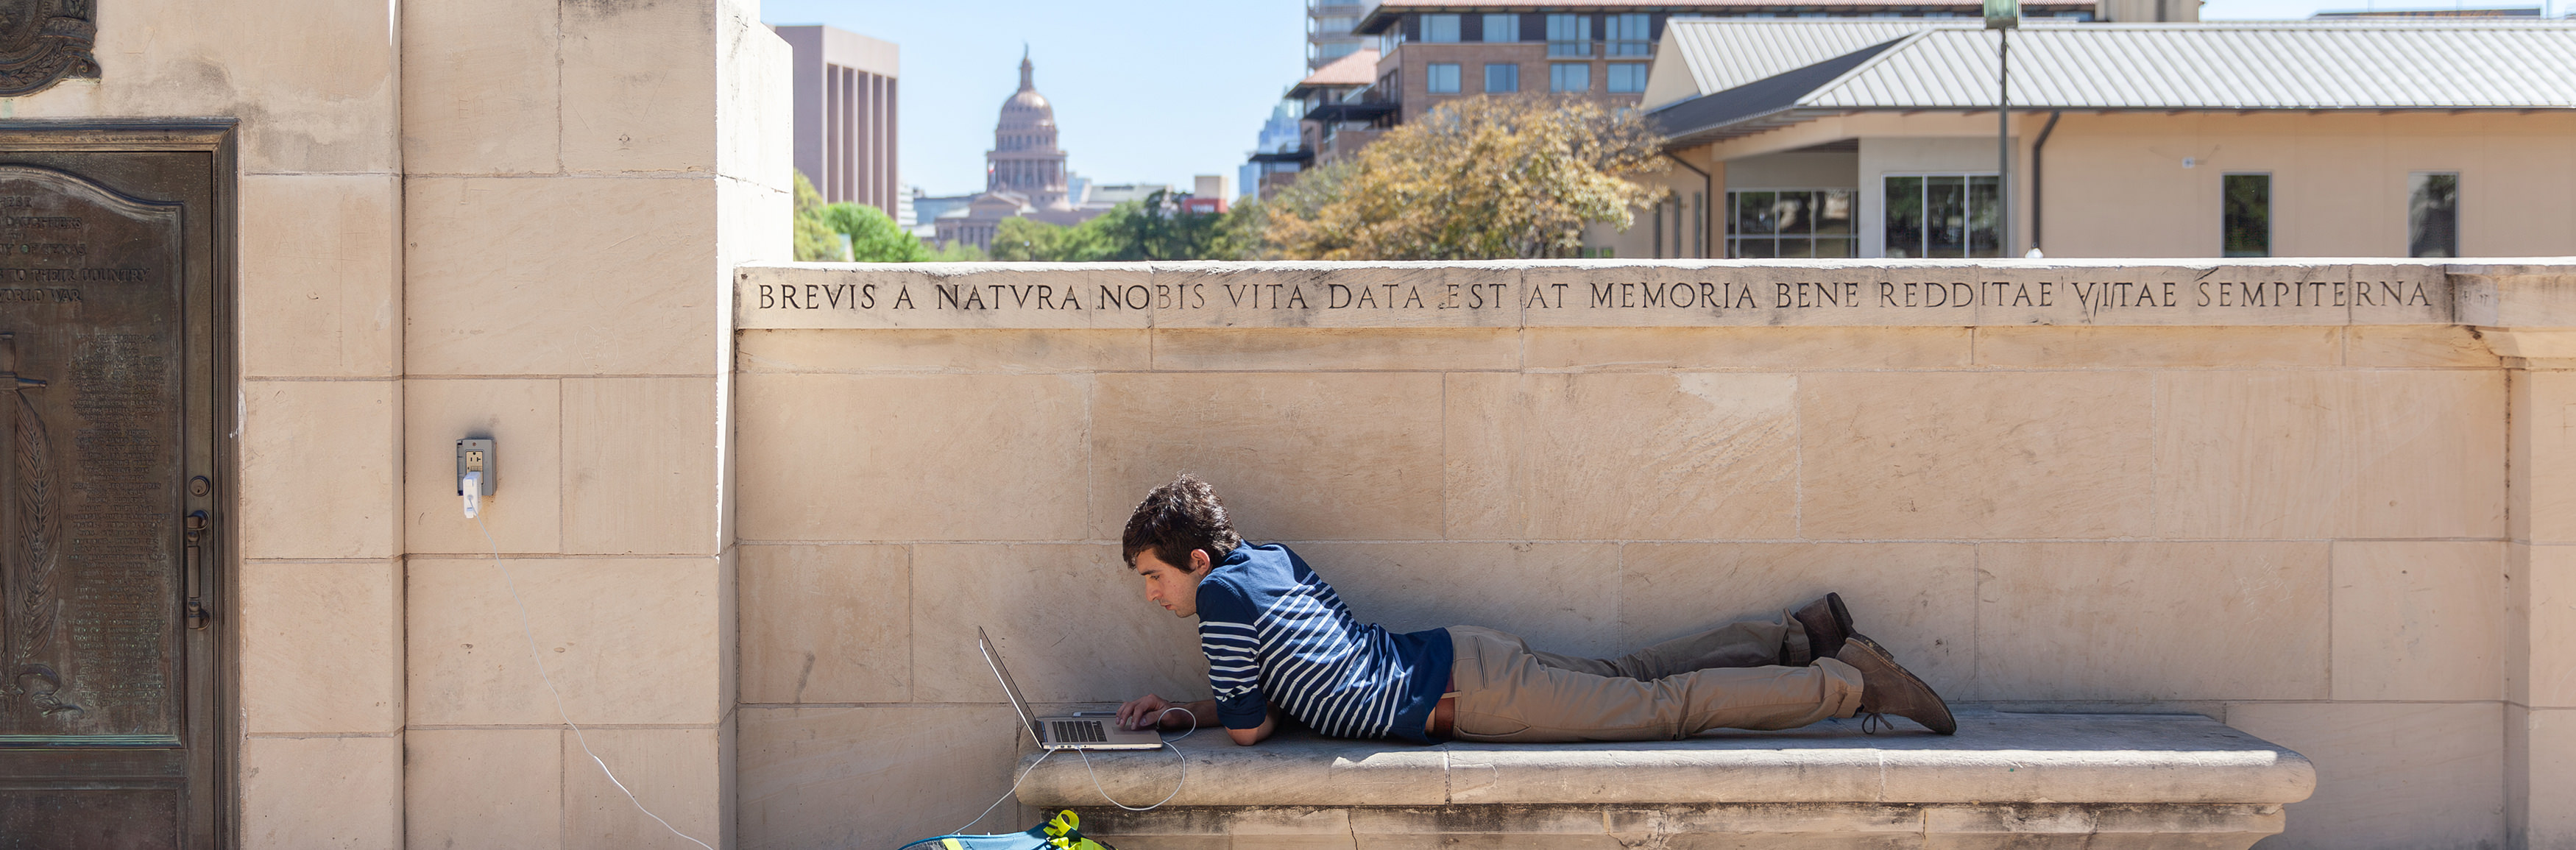 A student studies at the Littlefield Fountain